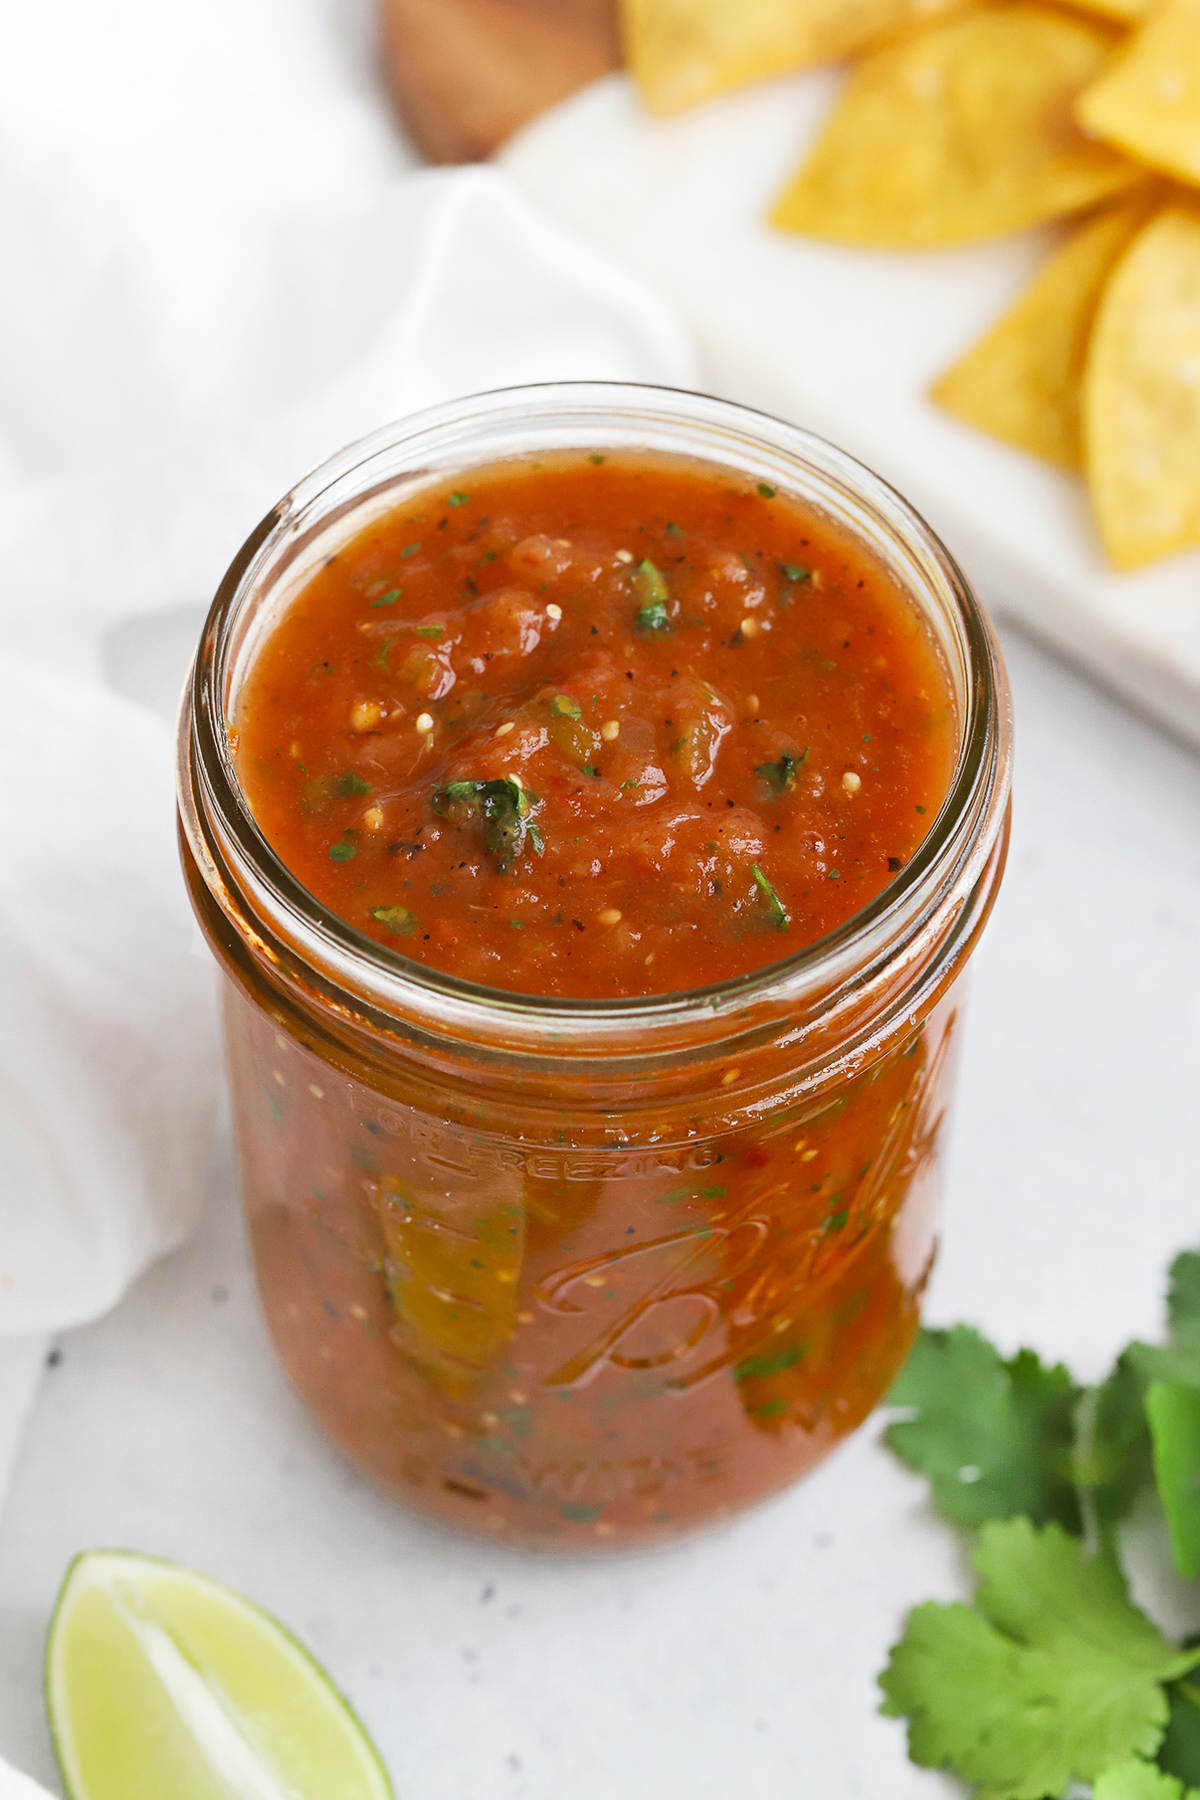 Front view of a jar of chipotle salsa with a platter of tortilla chips on a white background